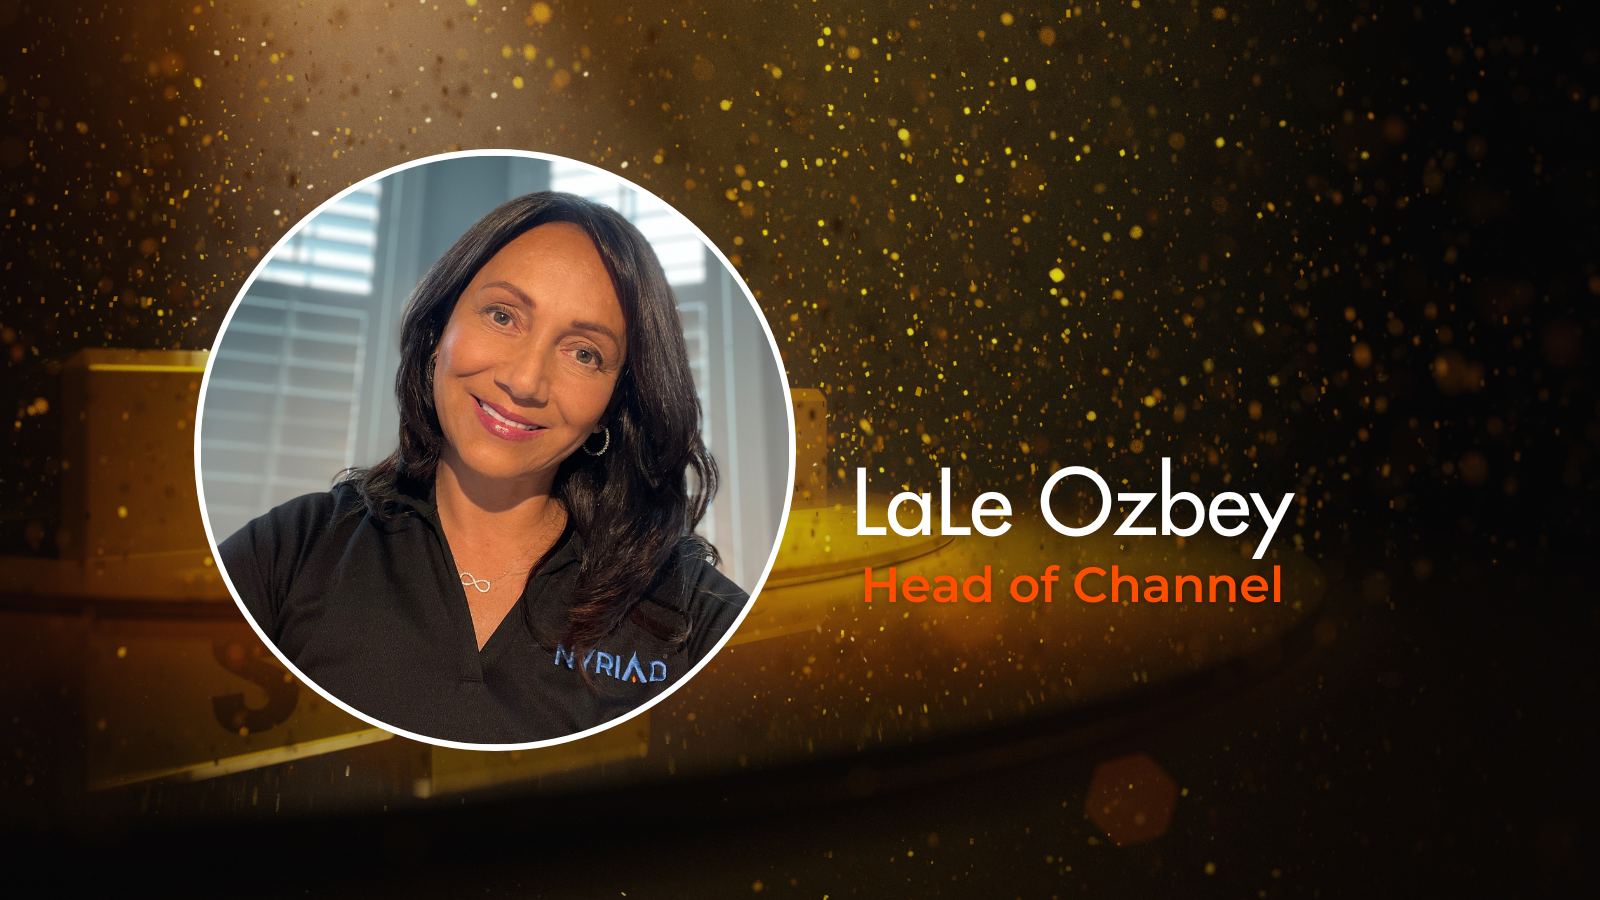 Meet LaLe Ozbey, Nyriad's Head of Channel